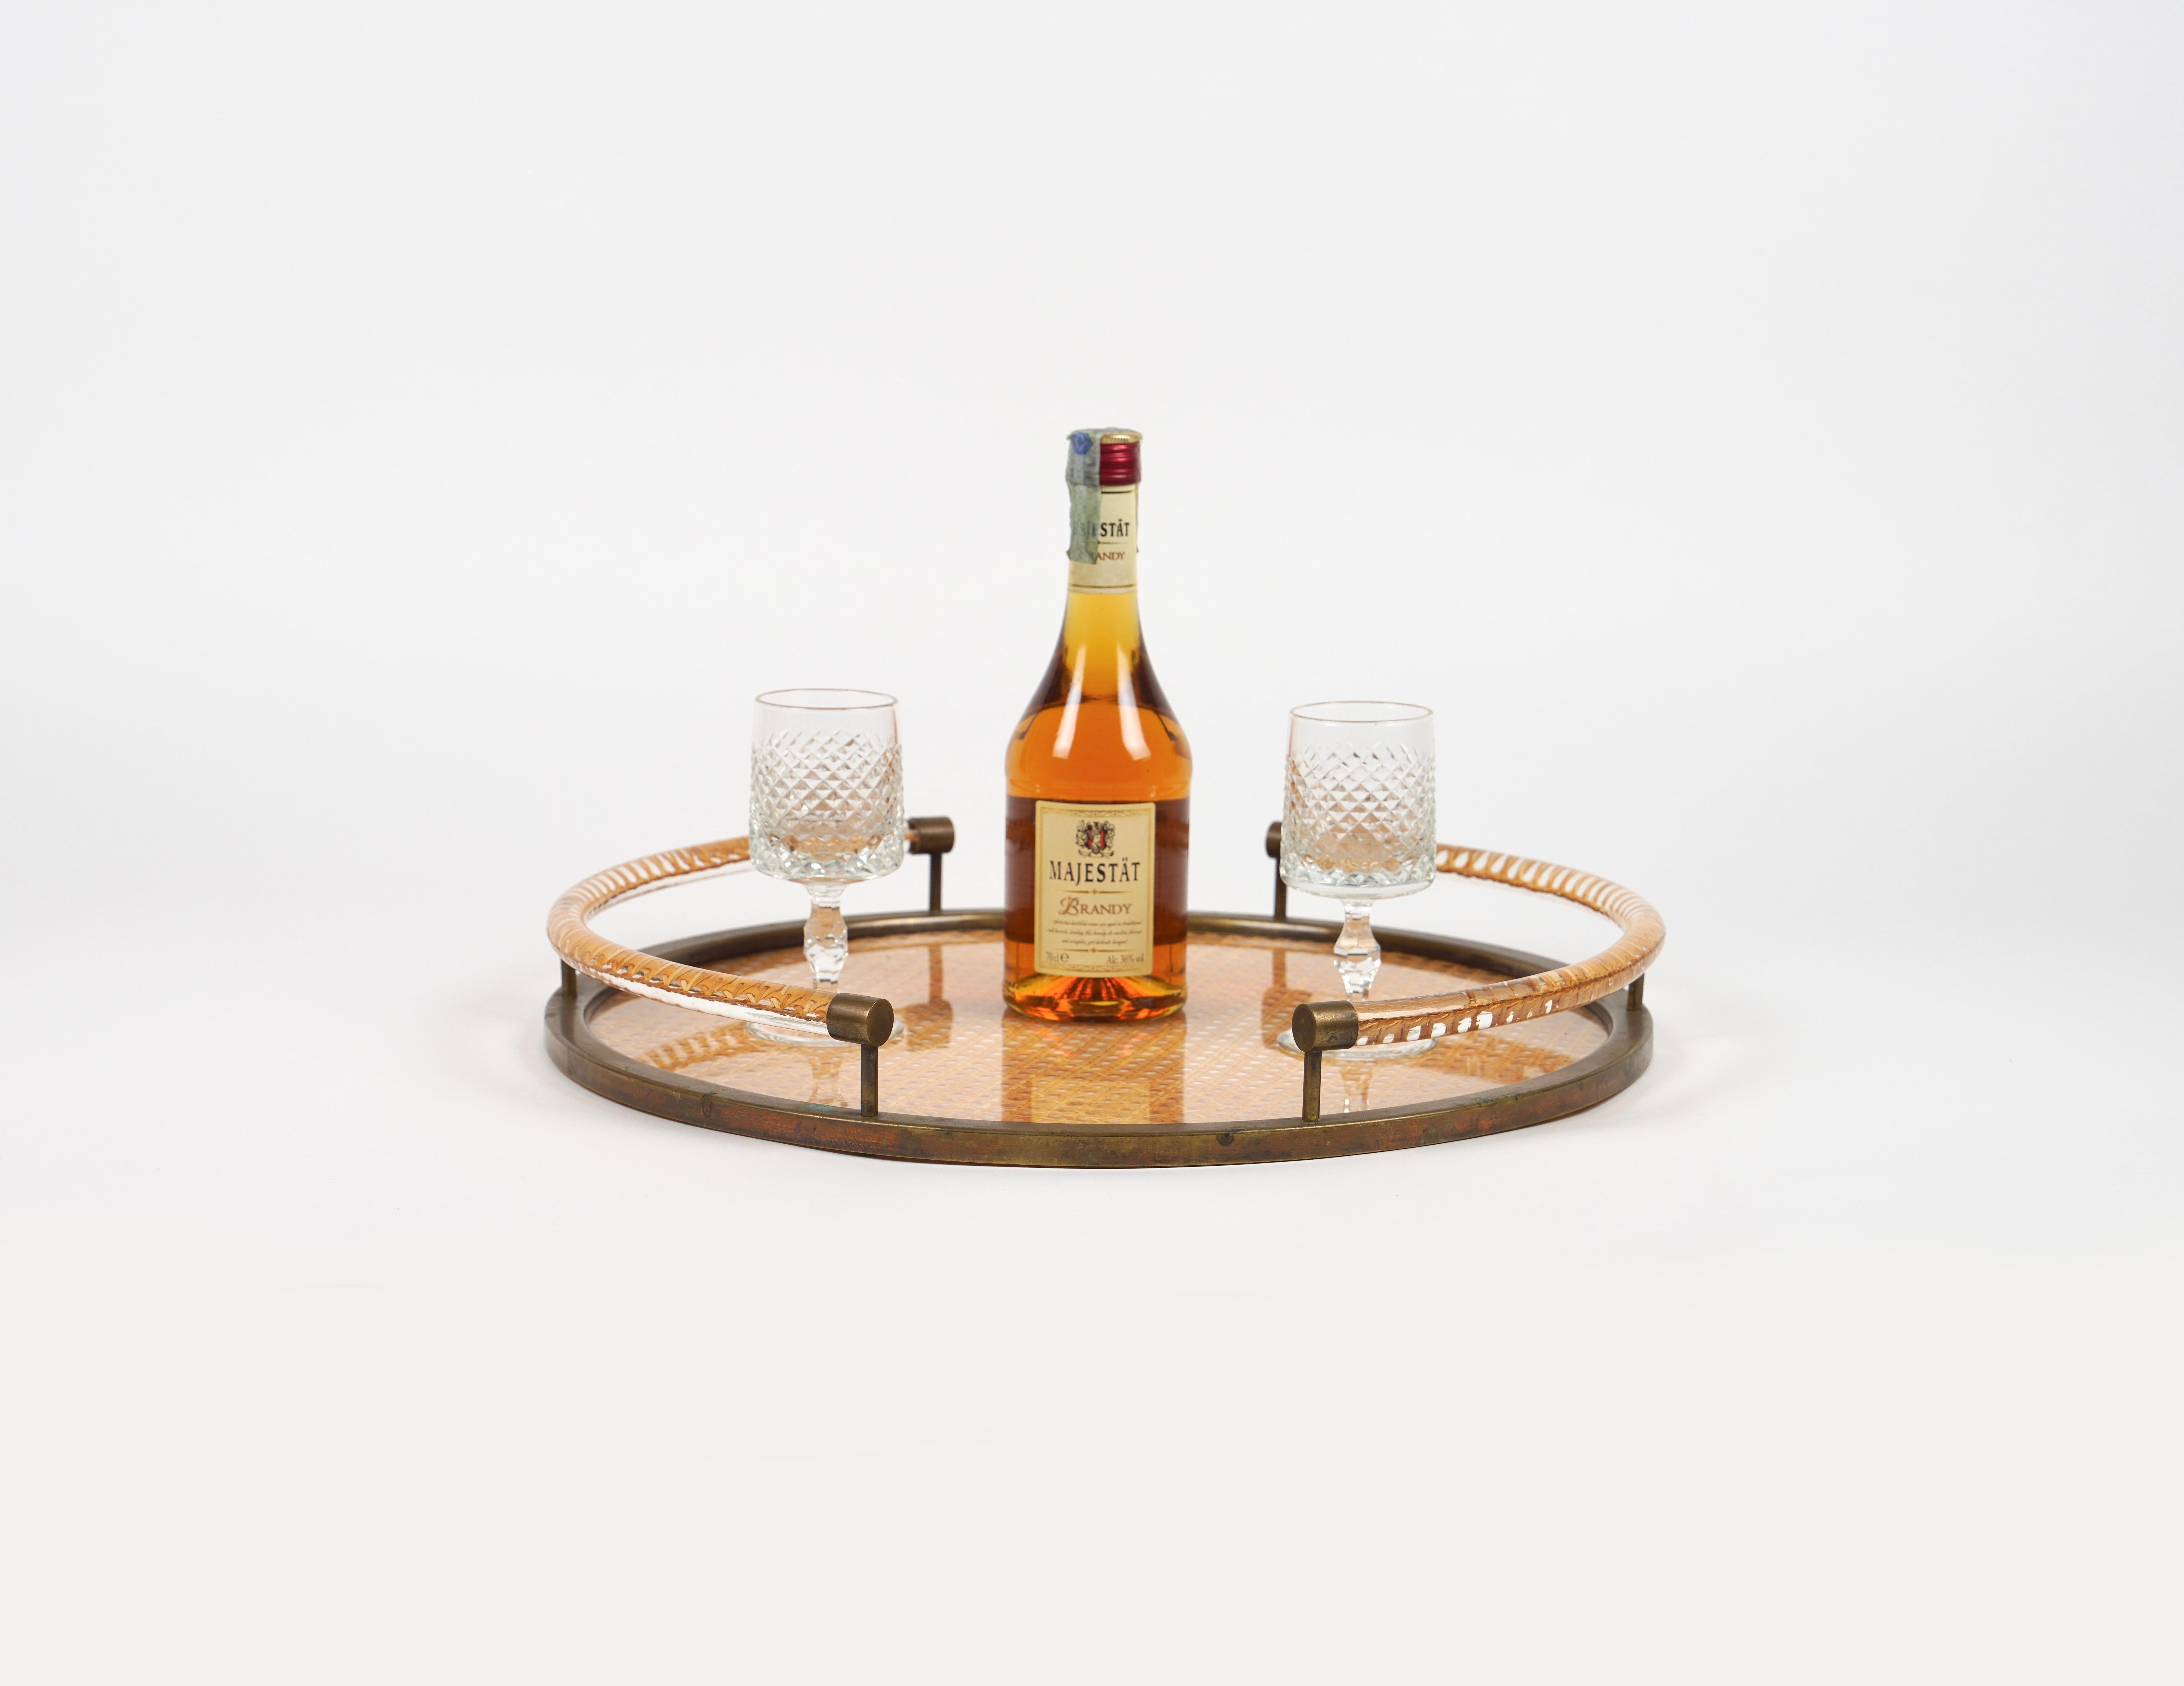 Acrylic Round Serving Tray in Lucite, Rattan and Brass Christian Dior Style, Italy 1970s